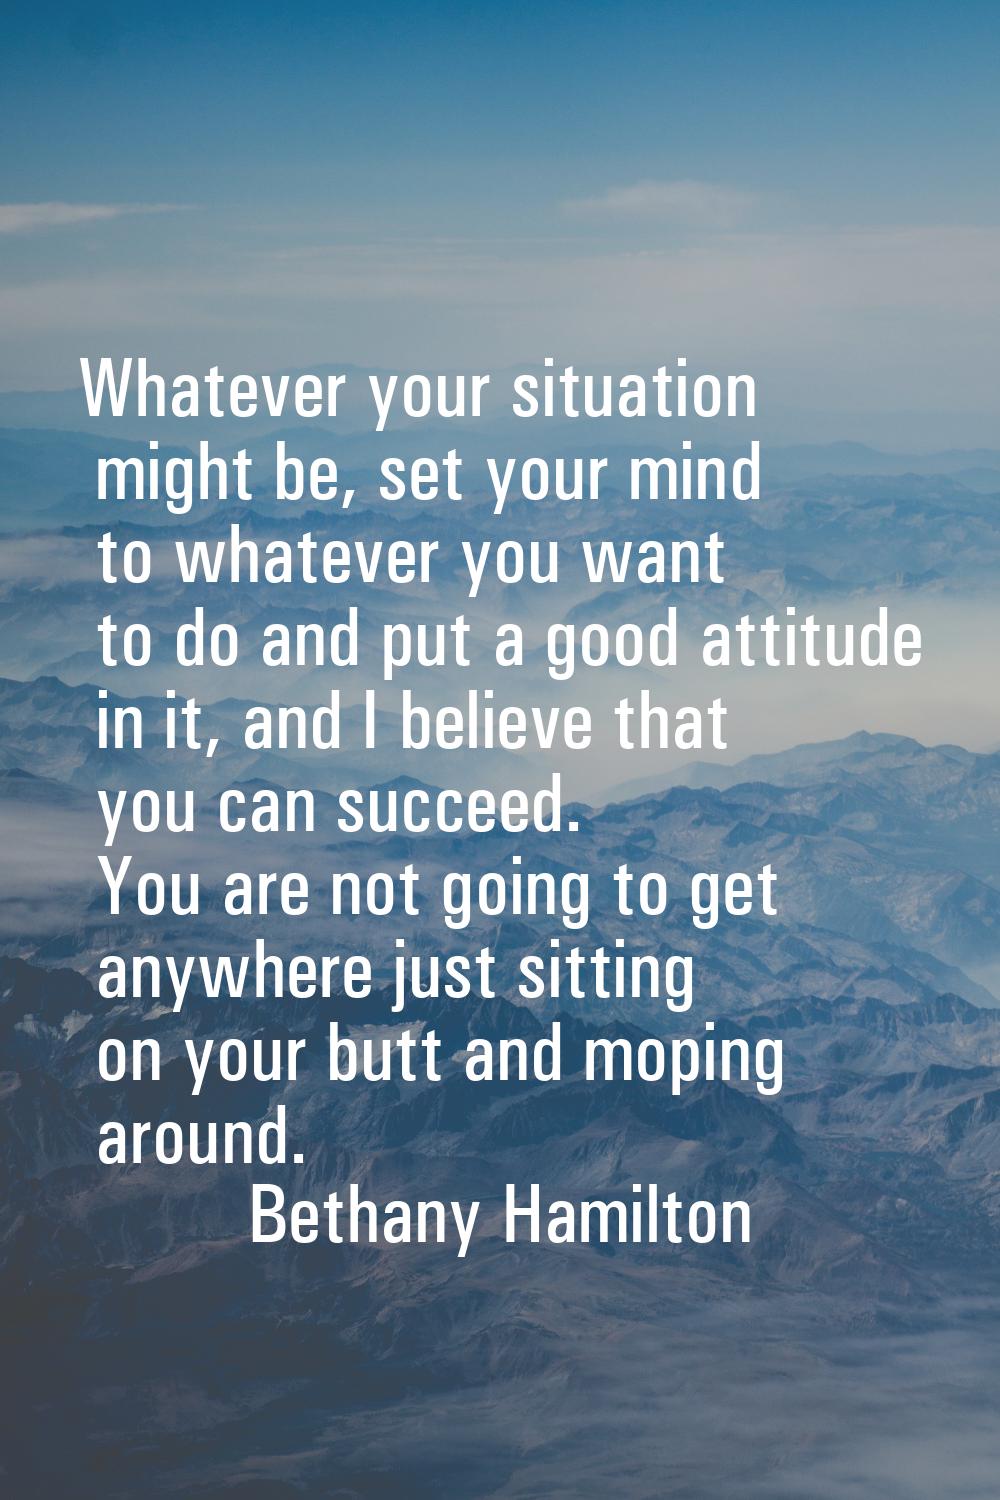 Whatever your situation might be, set your mind to whatever you want to do and put a good attitude 